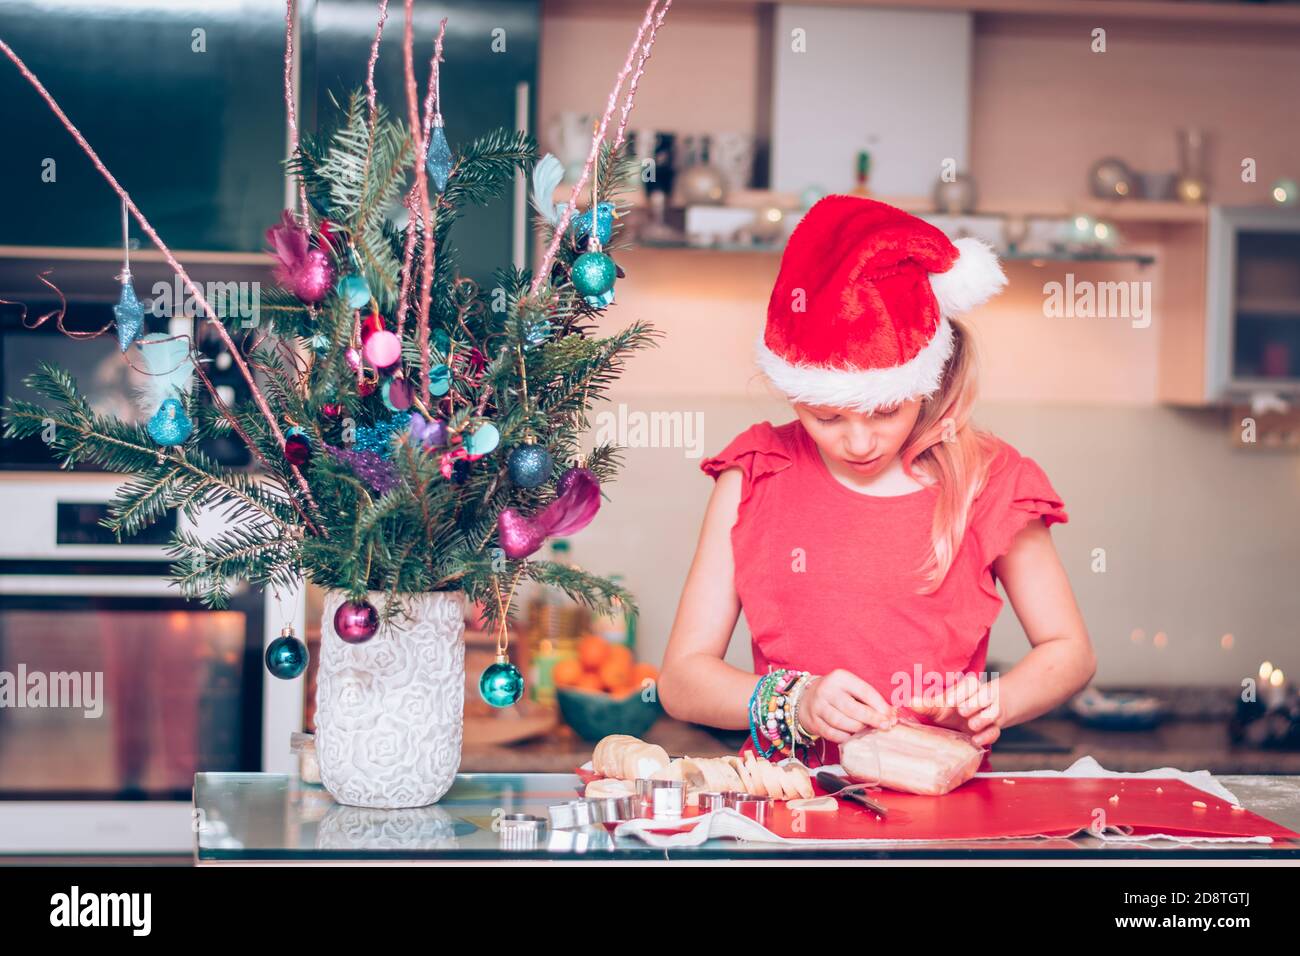 lovely blond girl preparing sweets in christmas atmosphere in the home kitchen Stock Photo